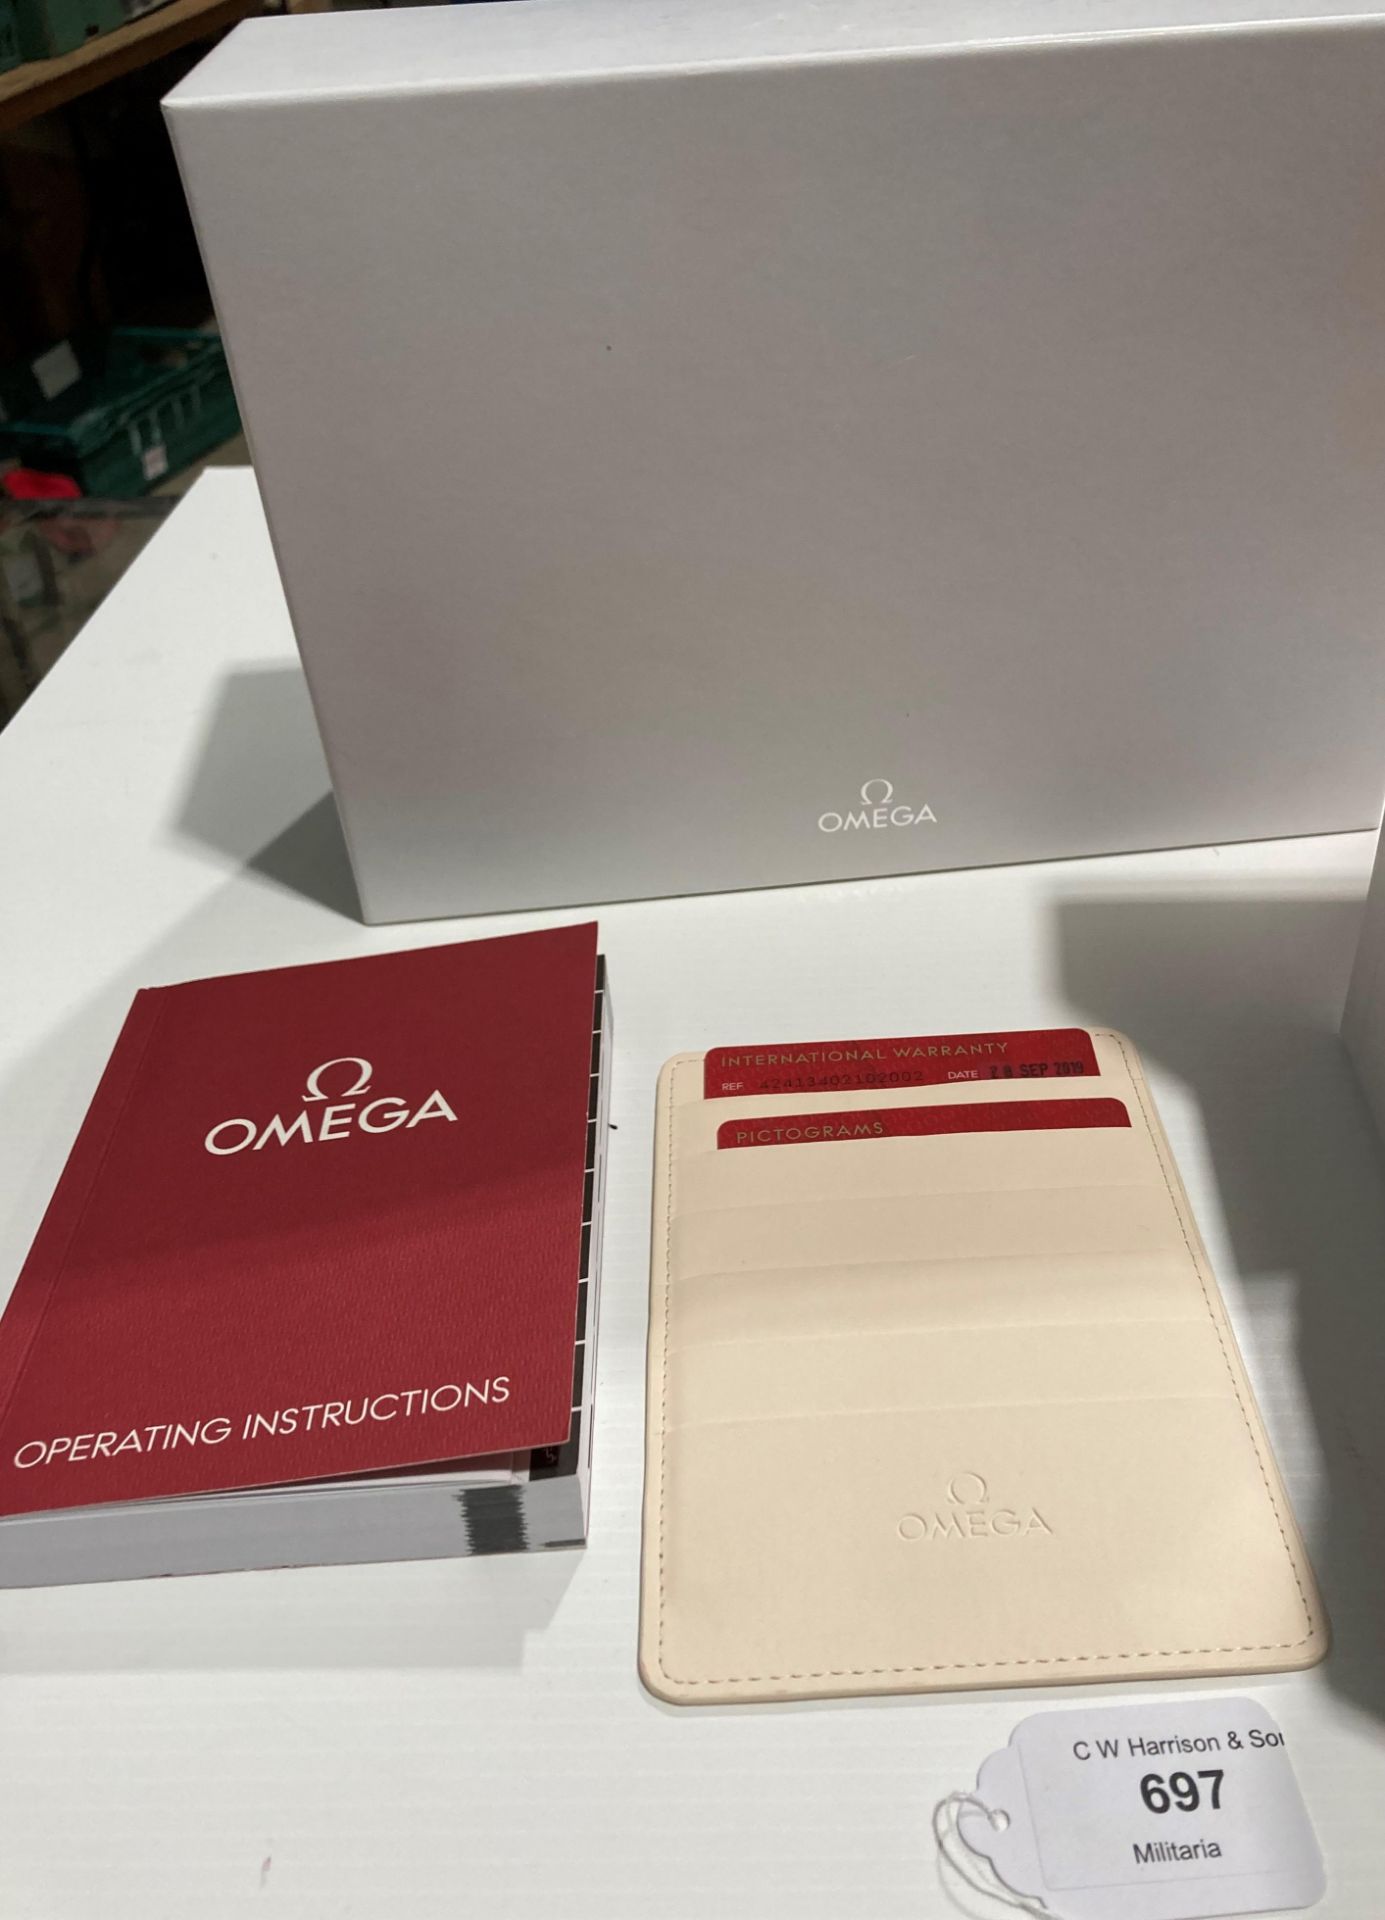 Omega polished wood-effect watch box in white outer protective case with operating instructions - Image 3 of 4